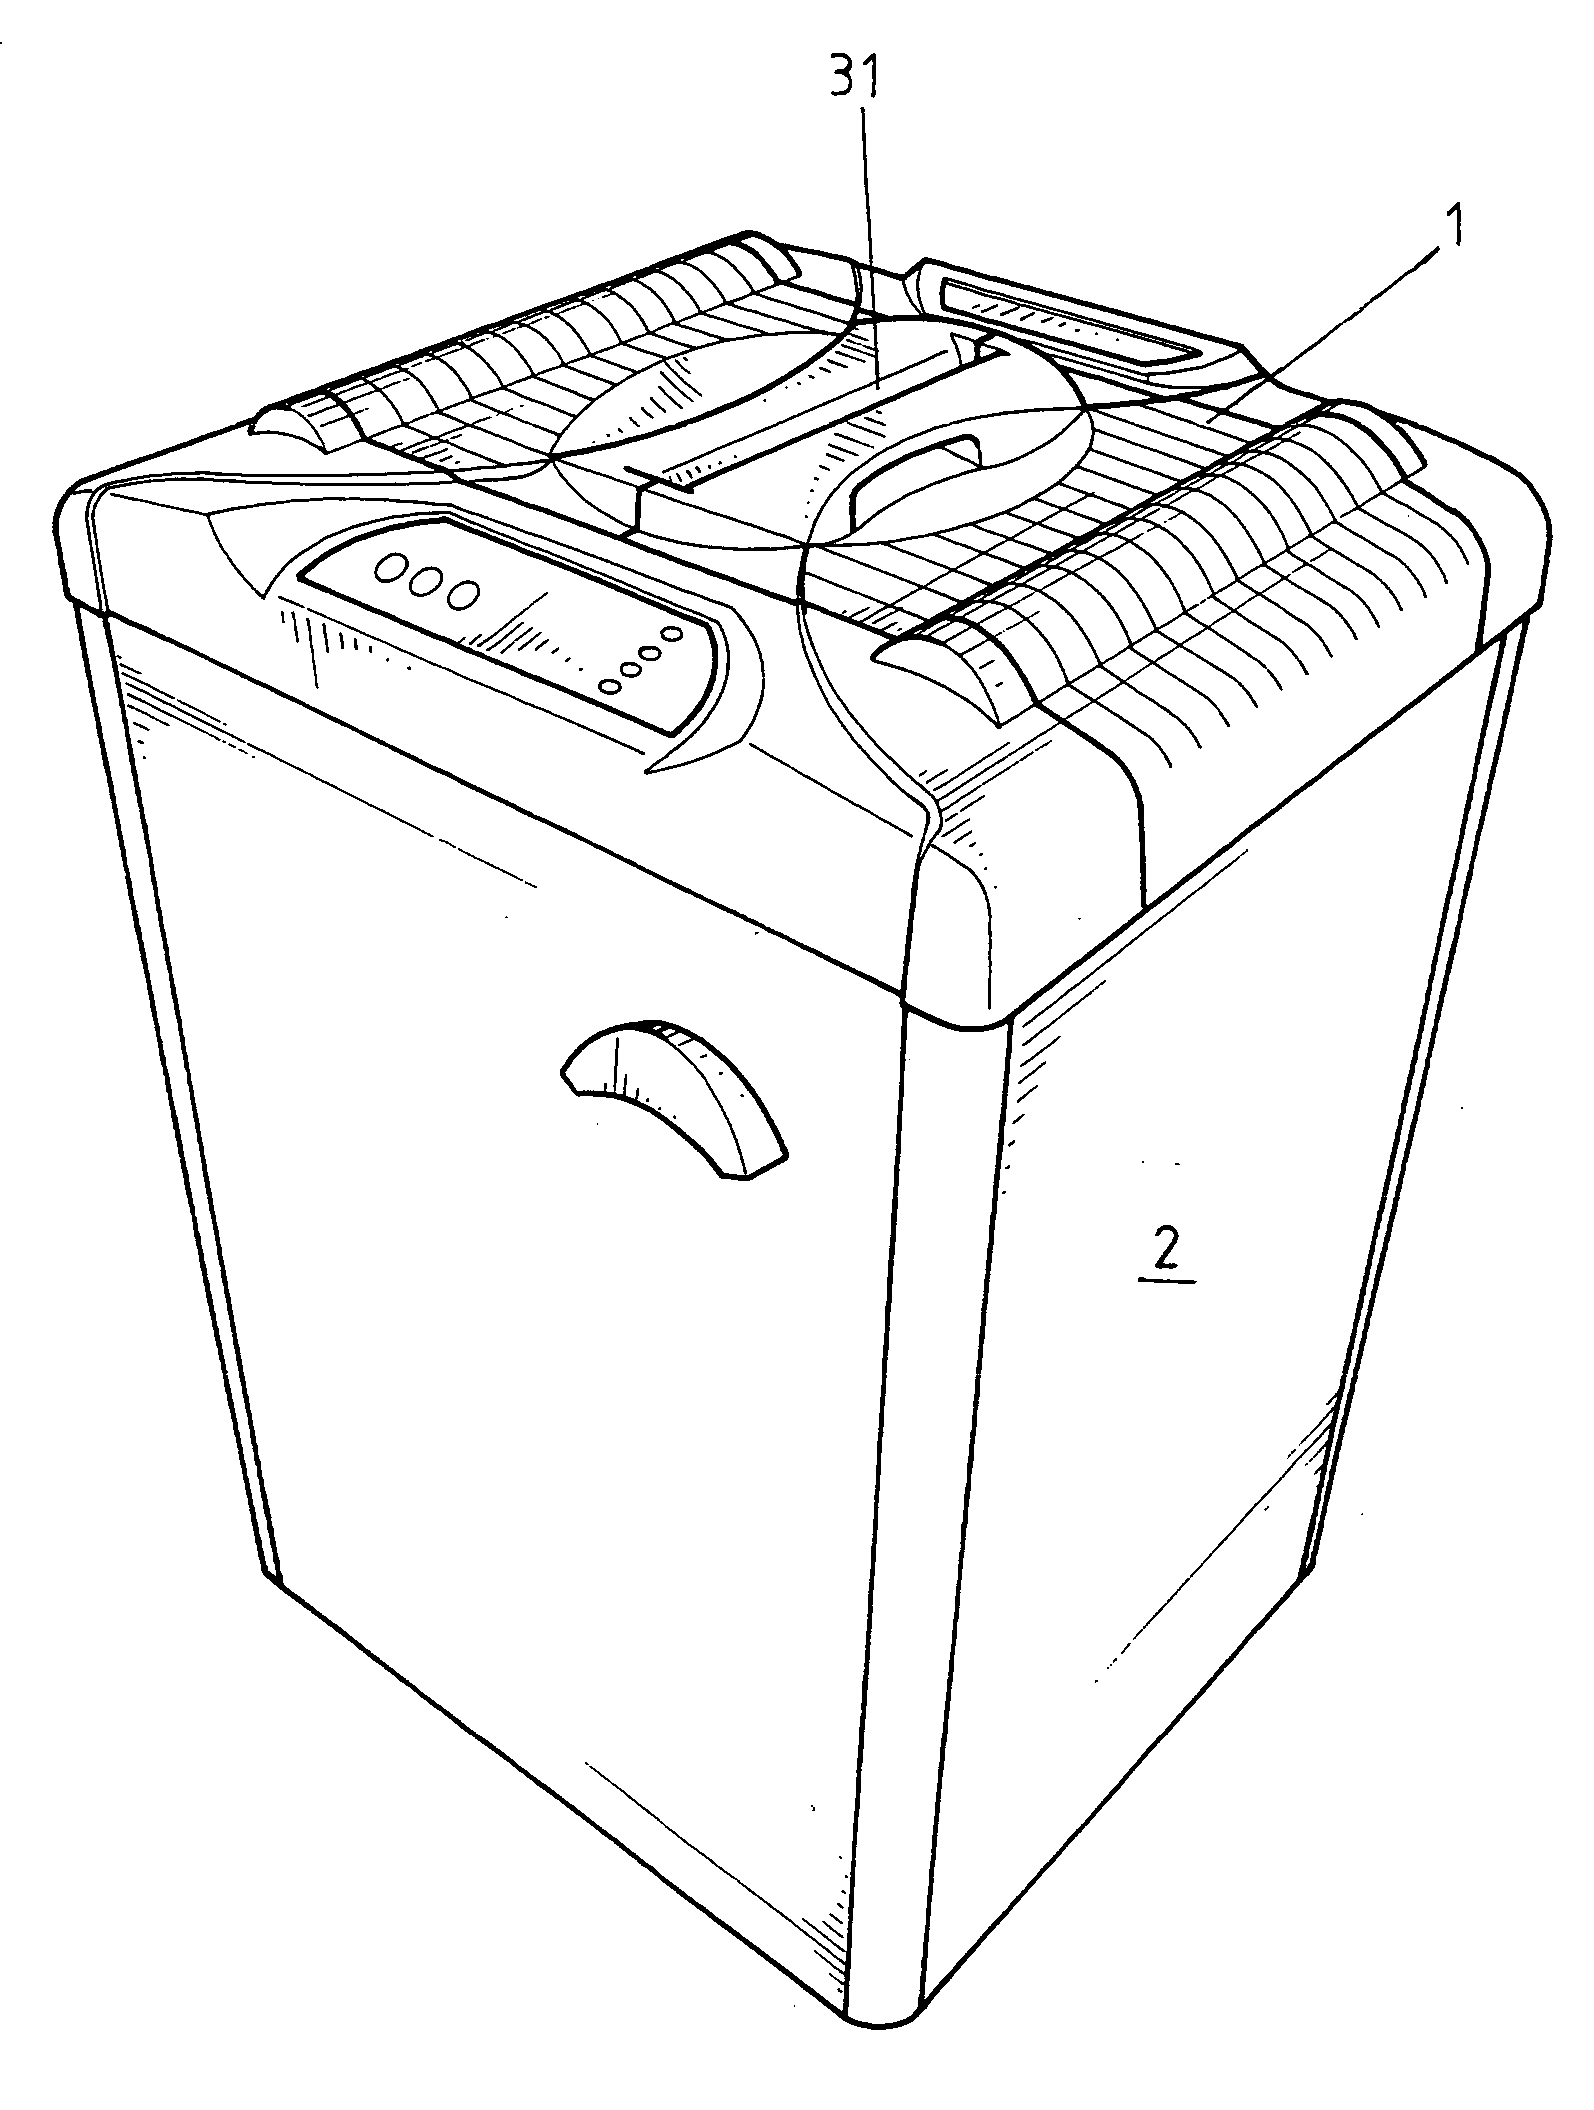 Auto-feed buit-in a paper shredder